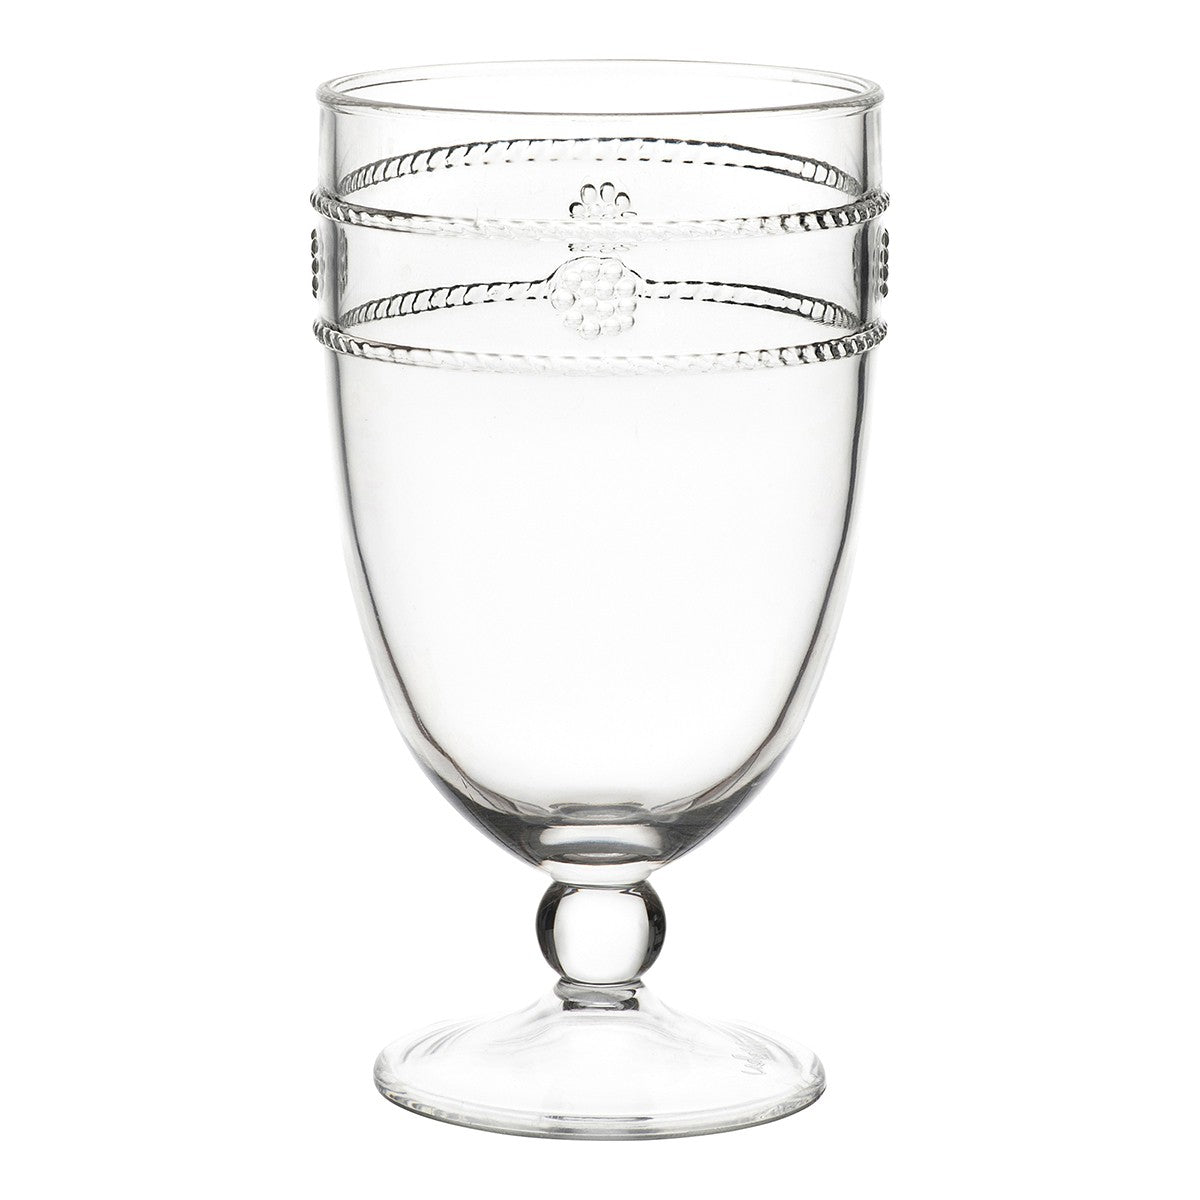 isabella acrylic goblet on a white background